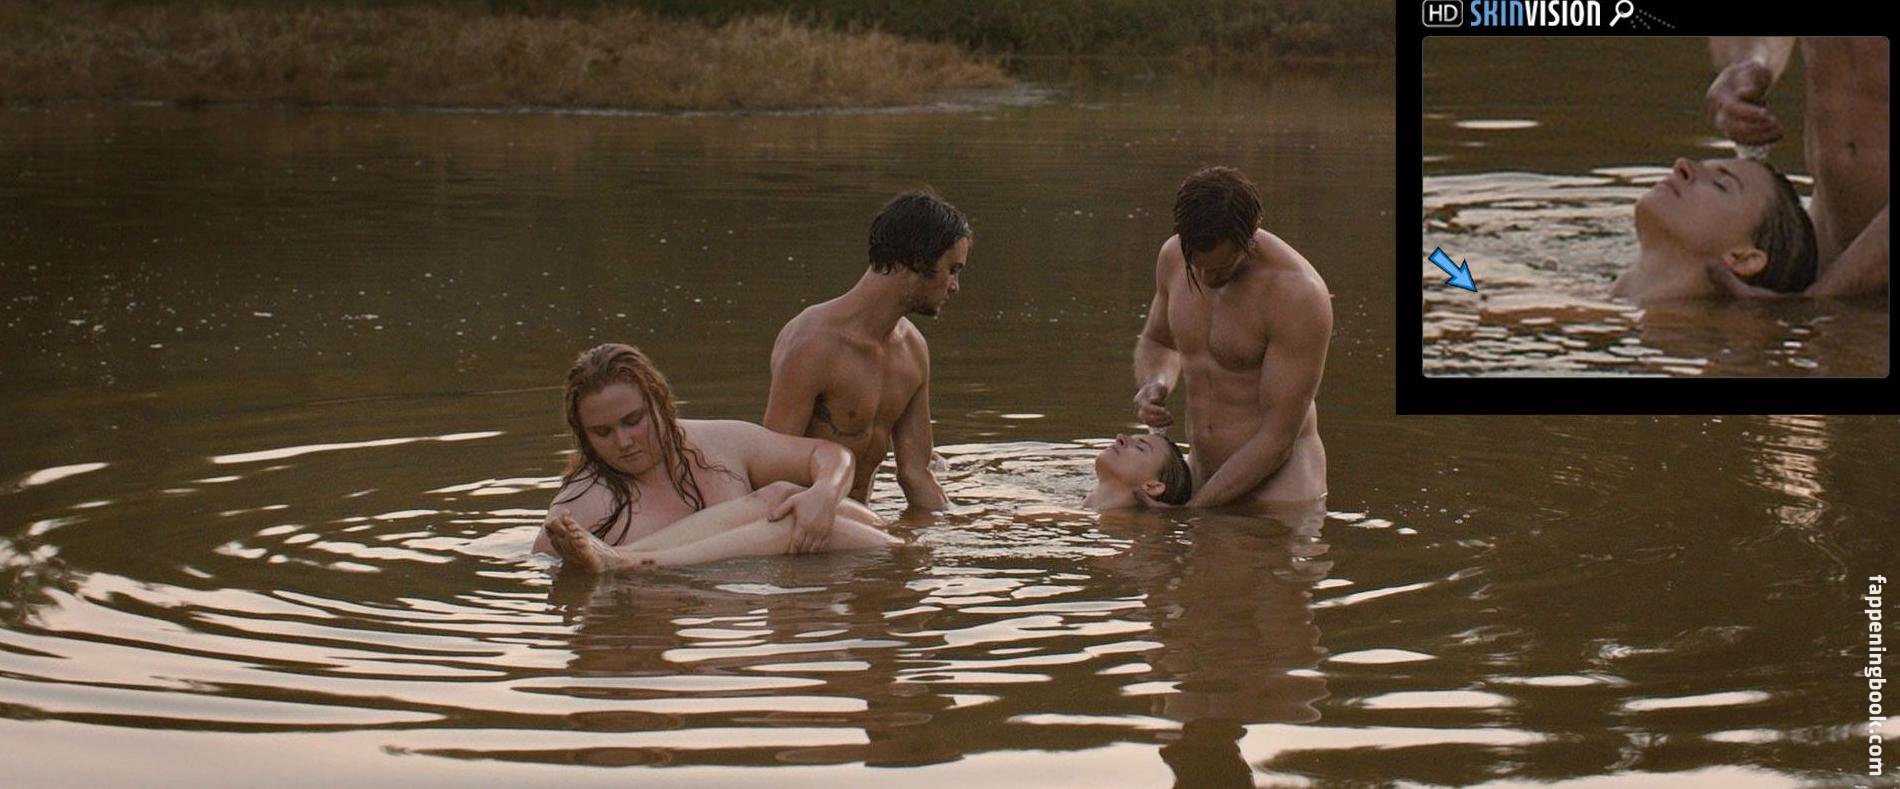 Brit Marling Nude, The Fappening - Photo #87382 - FappeningBook.